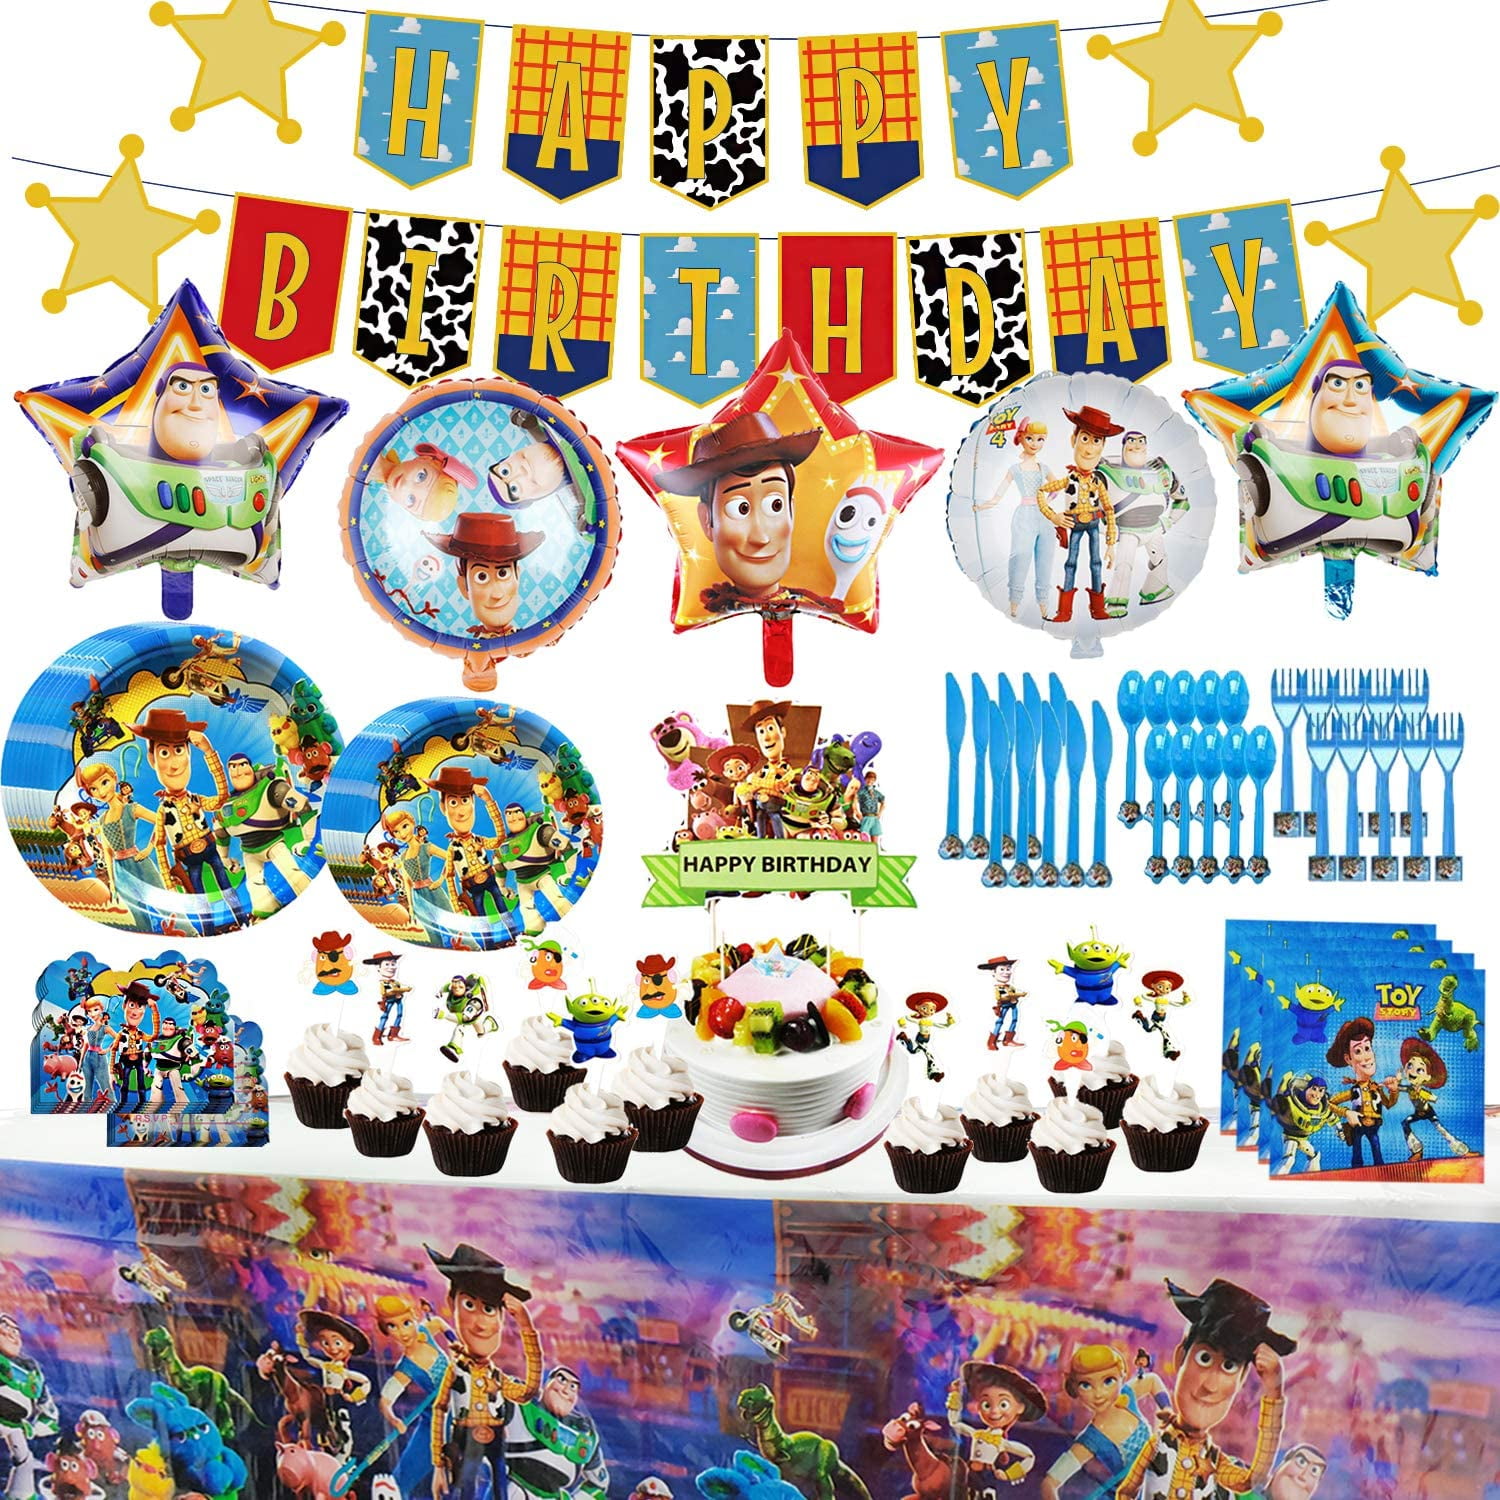 Toy Game Story Party Supplies Set,Toy Game Story Party Decorations,Happy Birthday Banner Balloons,Cake Topper,Toy Story Cupcake Toppers For Toy Game Story Birthady Party Supplies 